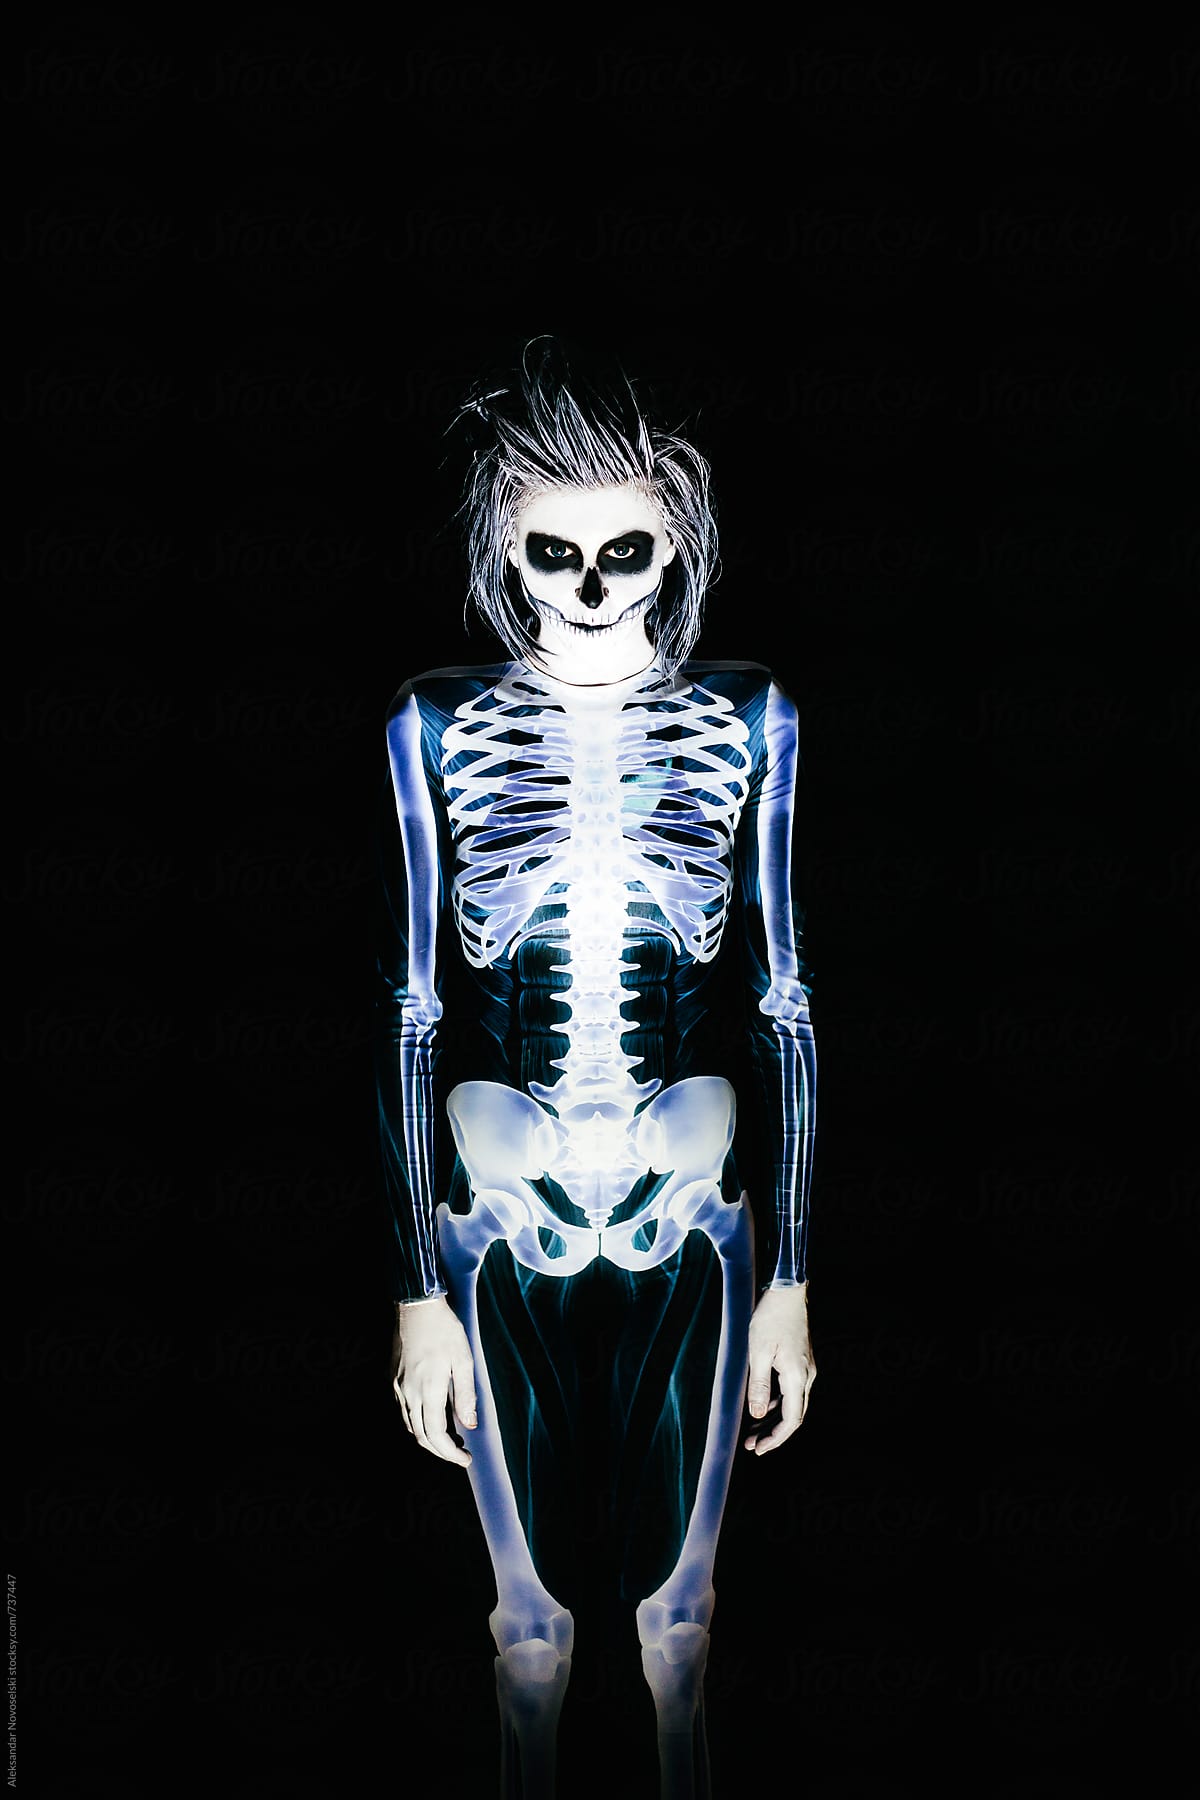 Spooky portrait of woman in skeleton costume and halloween make up on black background